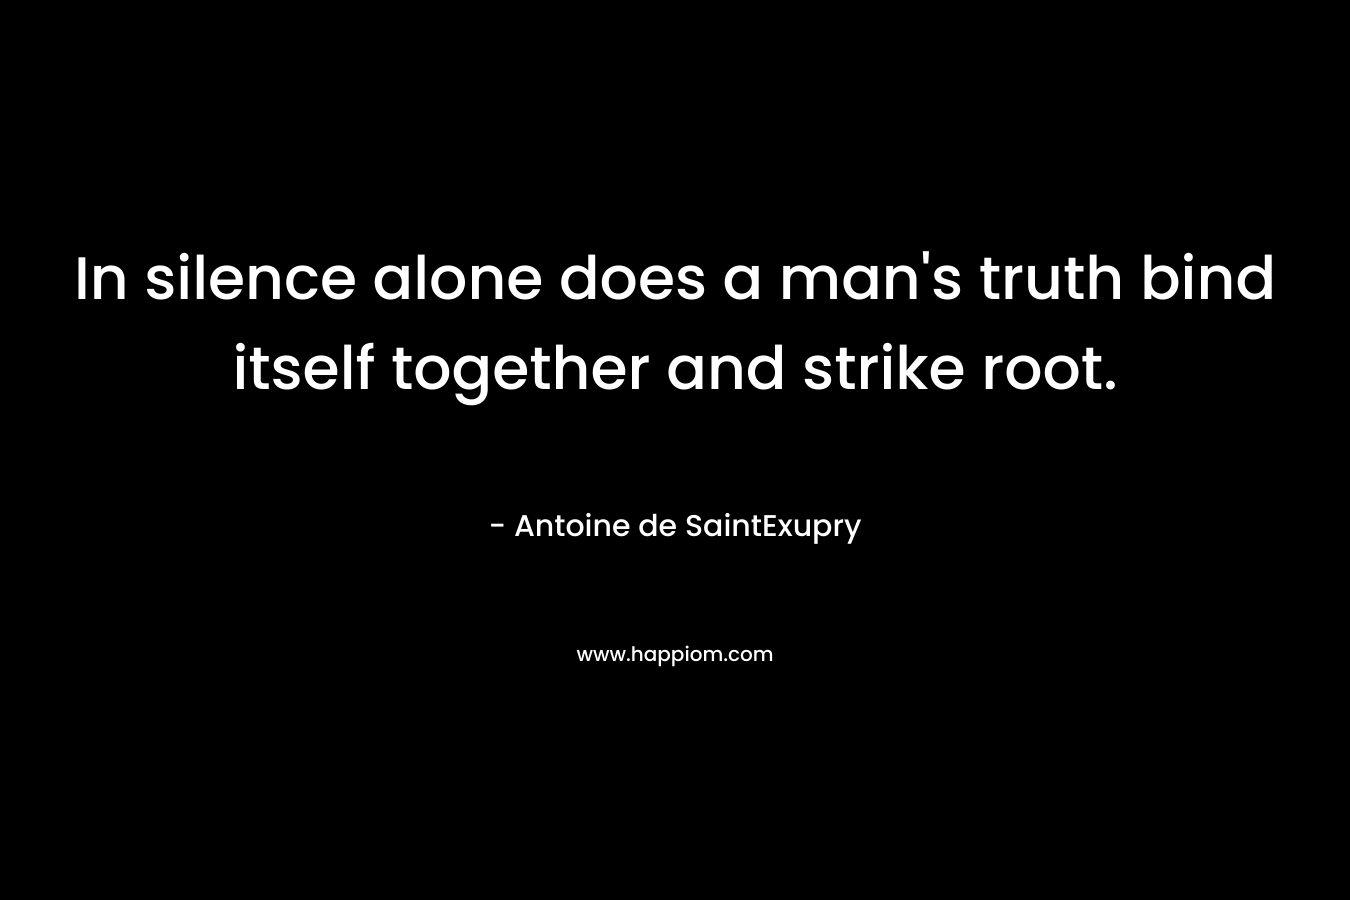 In silence alone does a man’s truth bind itself together and strike root. – Antoine de SaintExupry